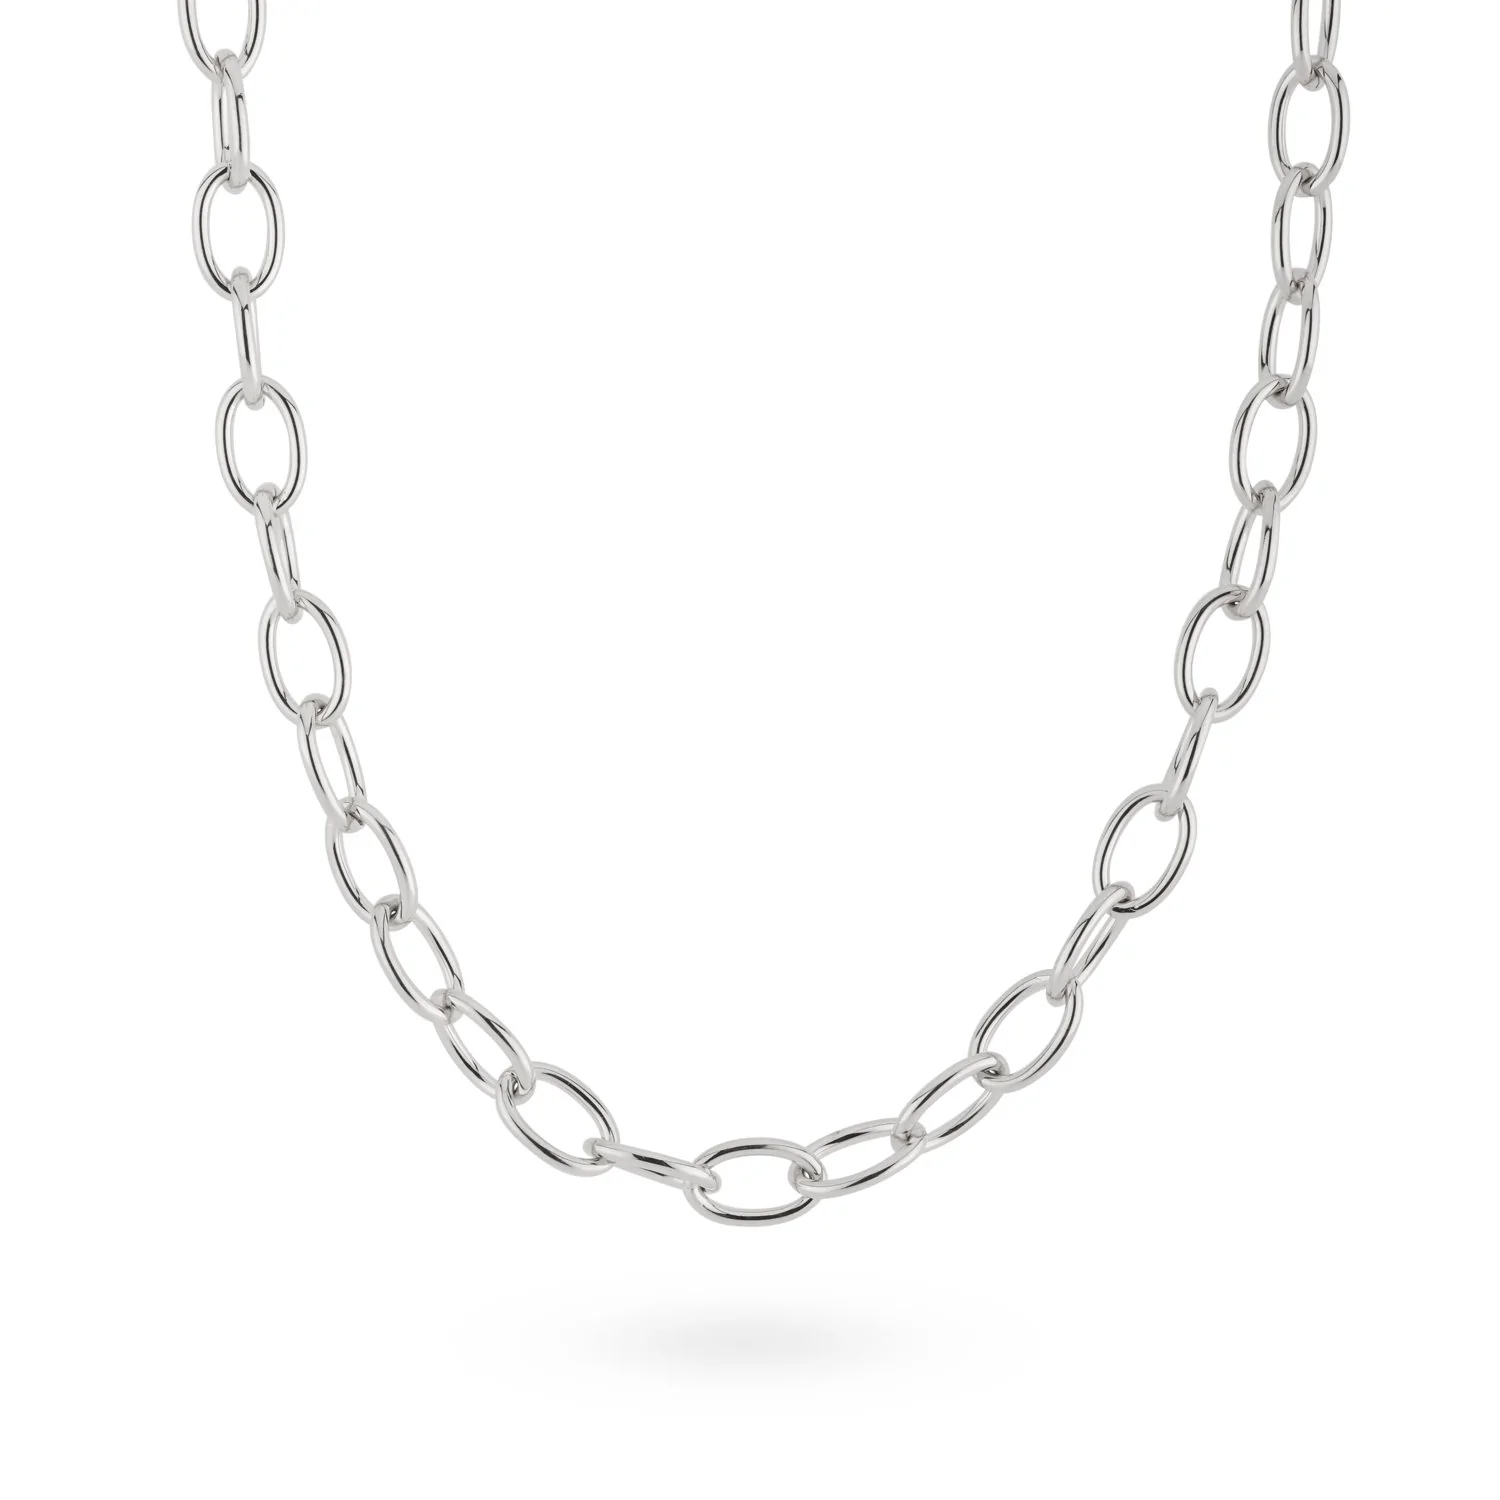 24Kae Silver Oval Link Necklace